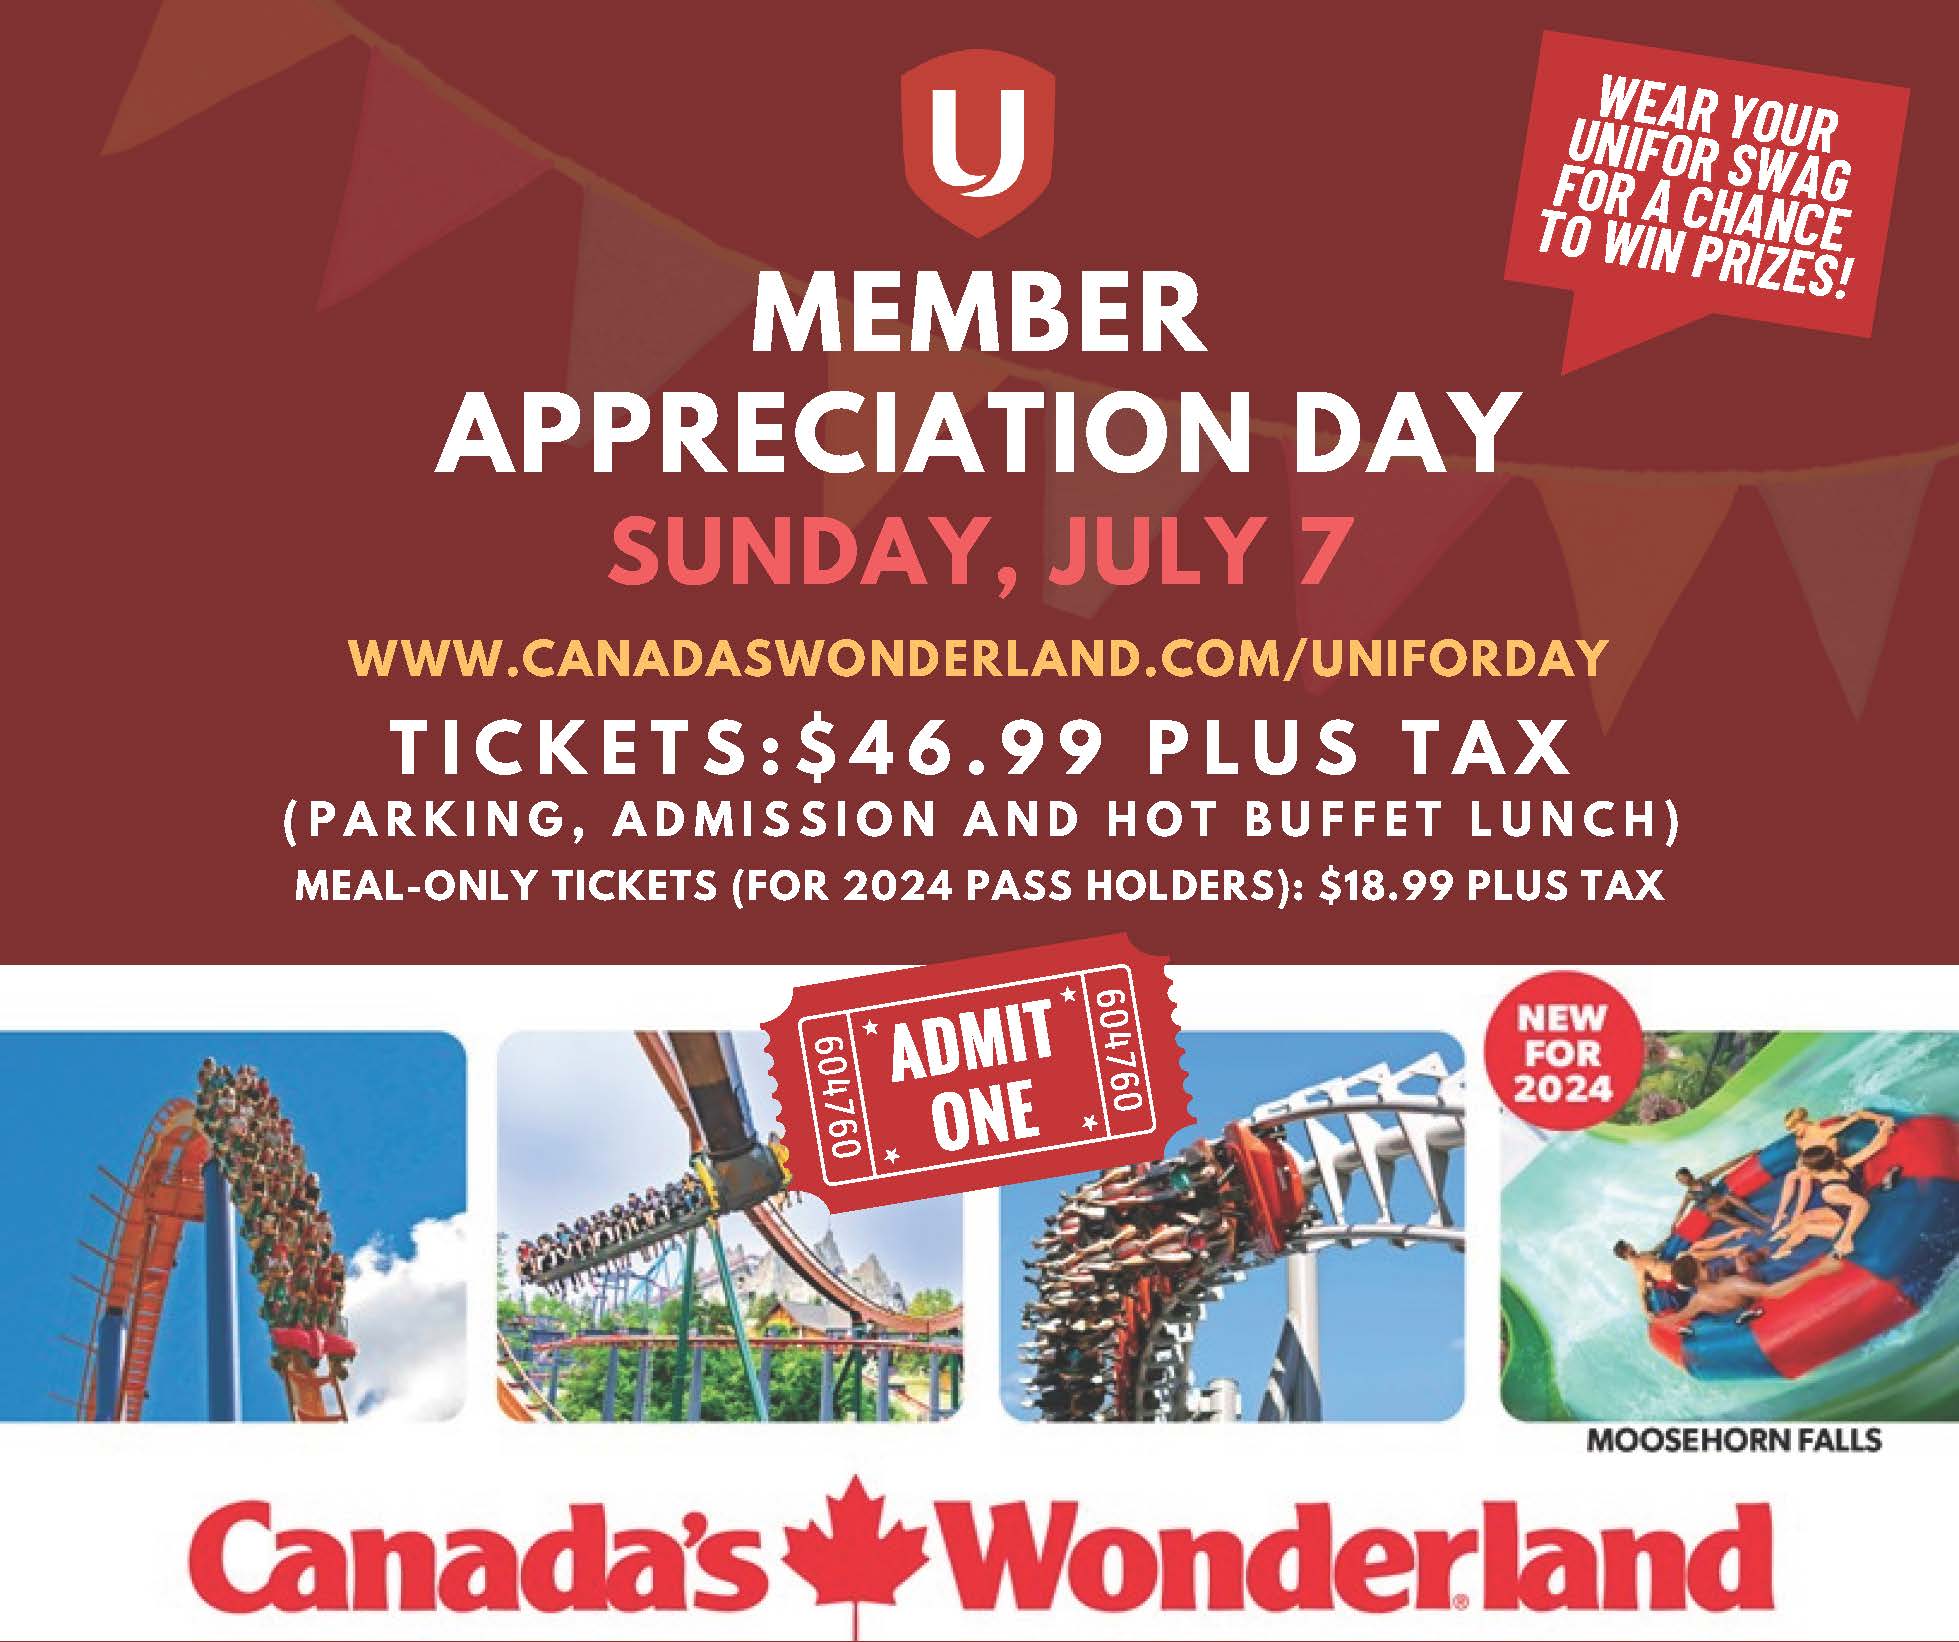 Graphic for Unifor appriciation day at Canada's Wonderland